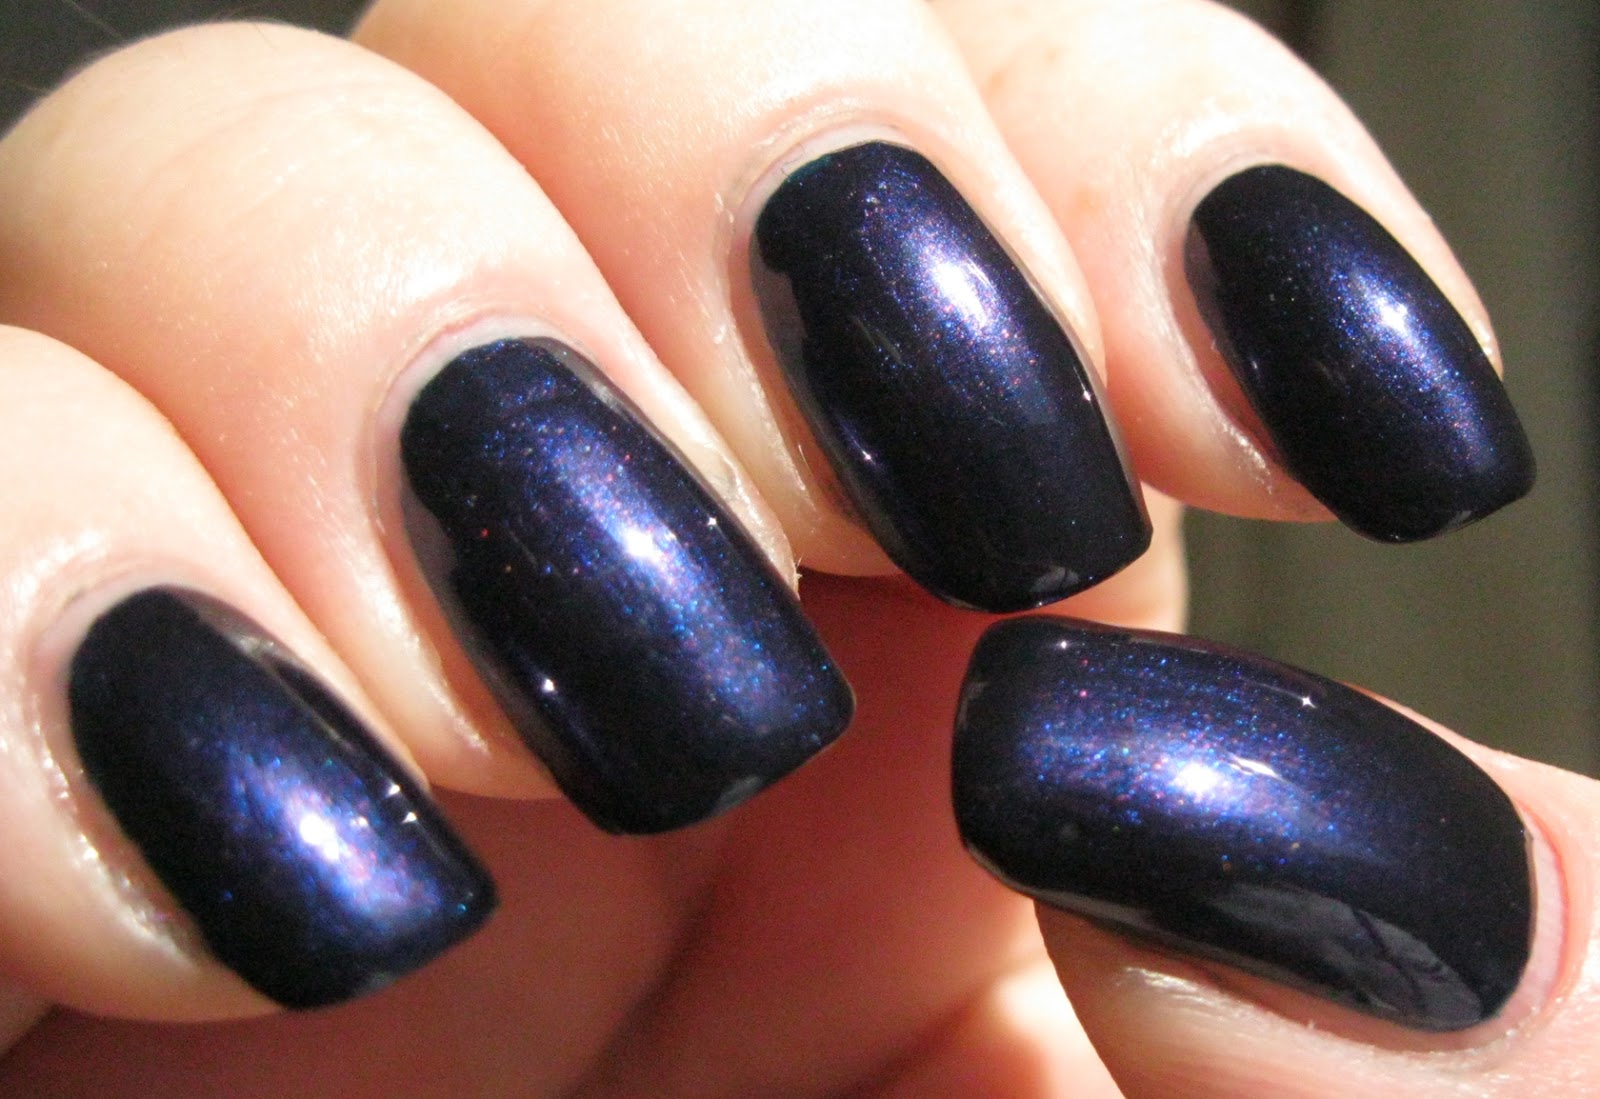 OPI Nail Lacquer in "Russian Navy" - wide 8